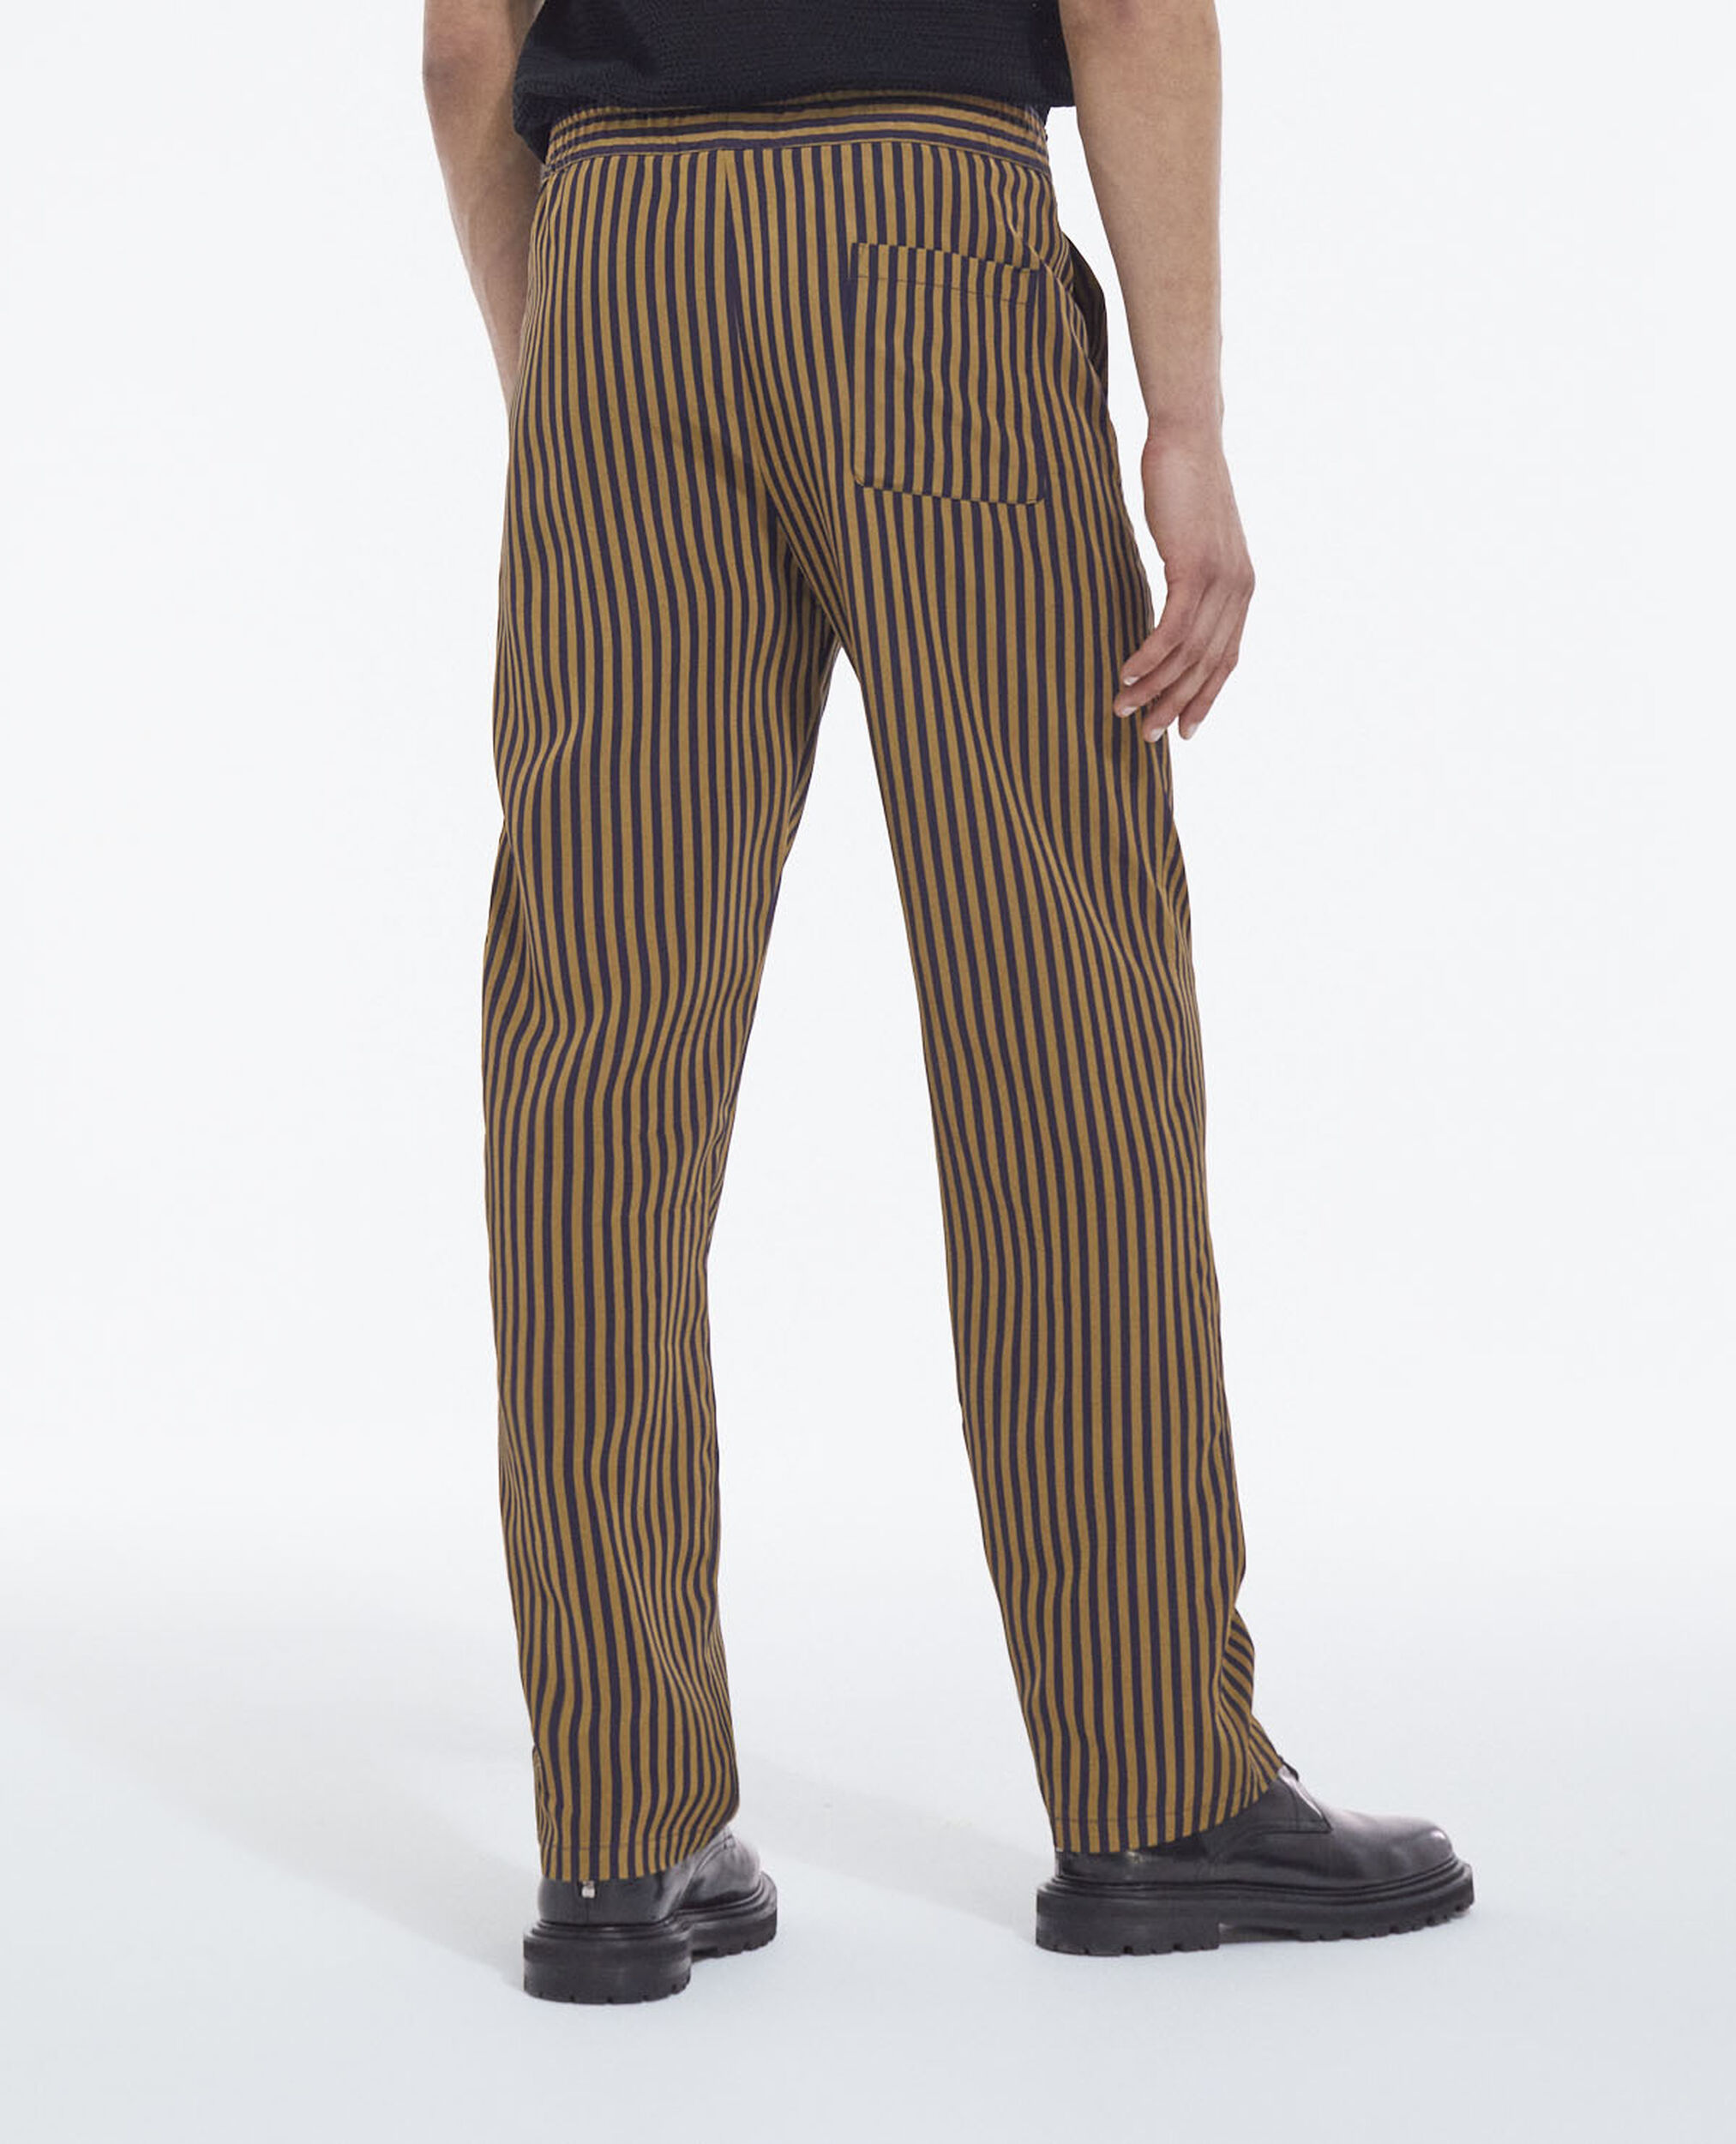 Flowing straight-cut striped blue pants, NAVY / BROWN, hi-res image number null